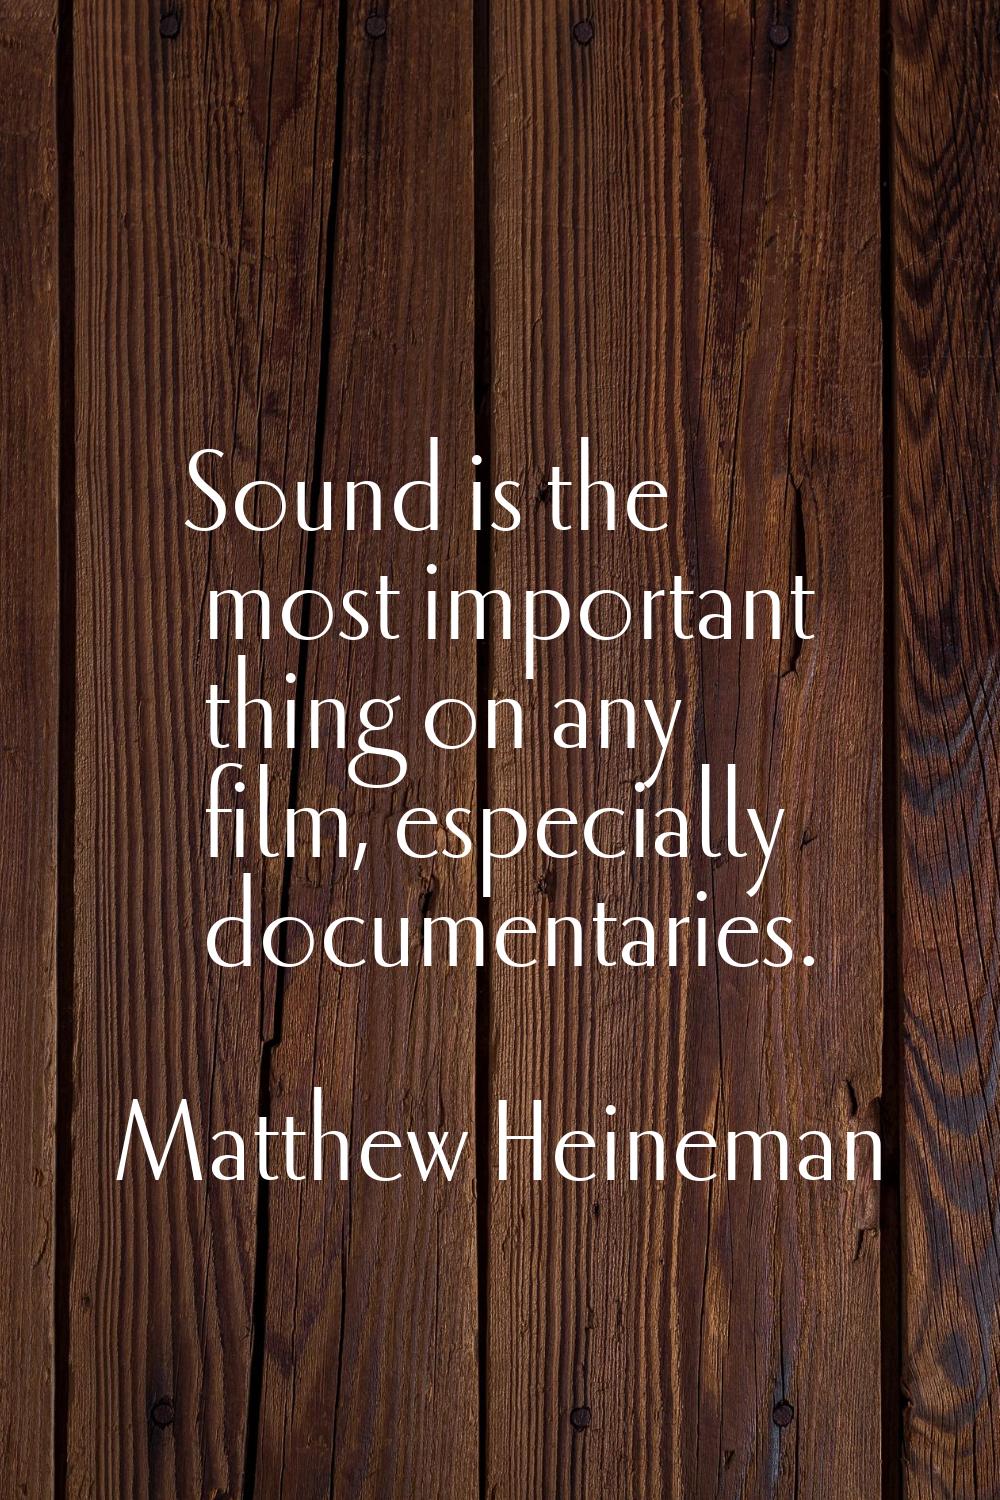 Sound is the most important thing on any film, especially documentaries.